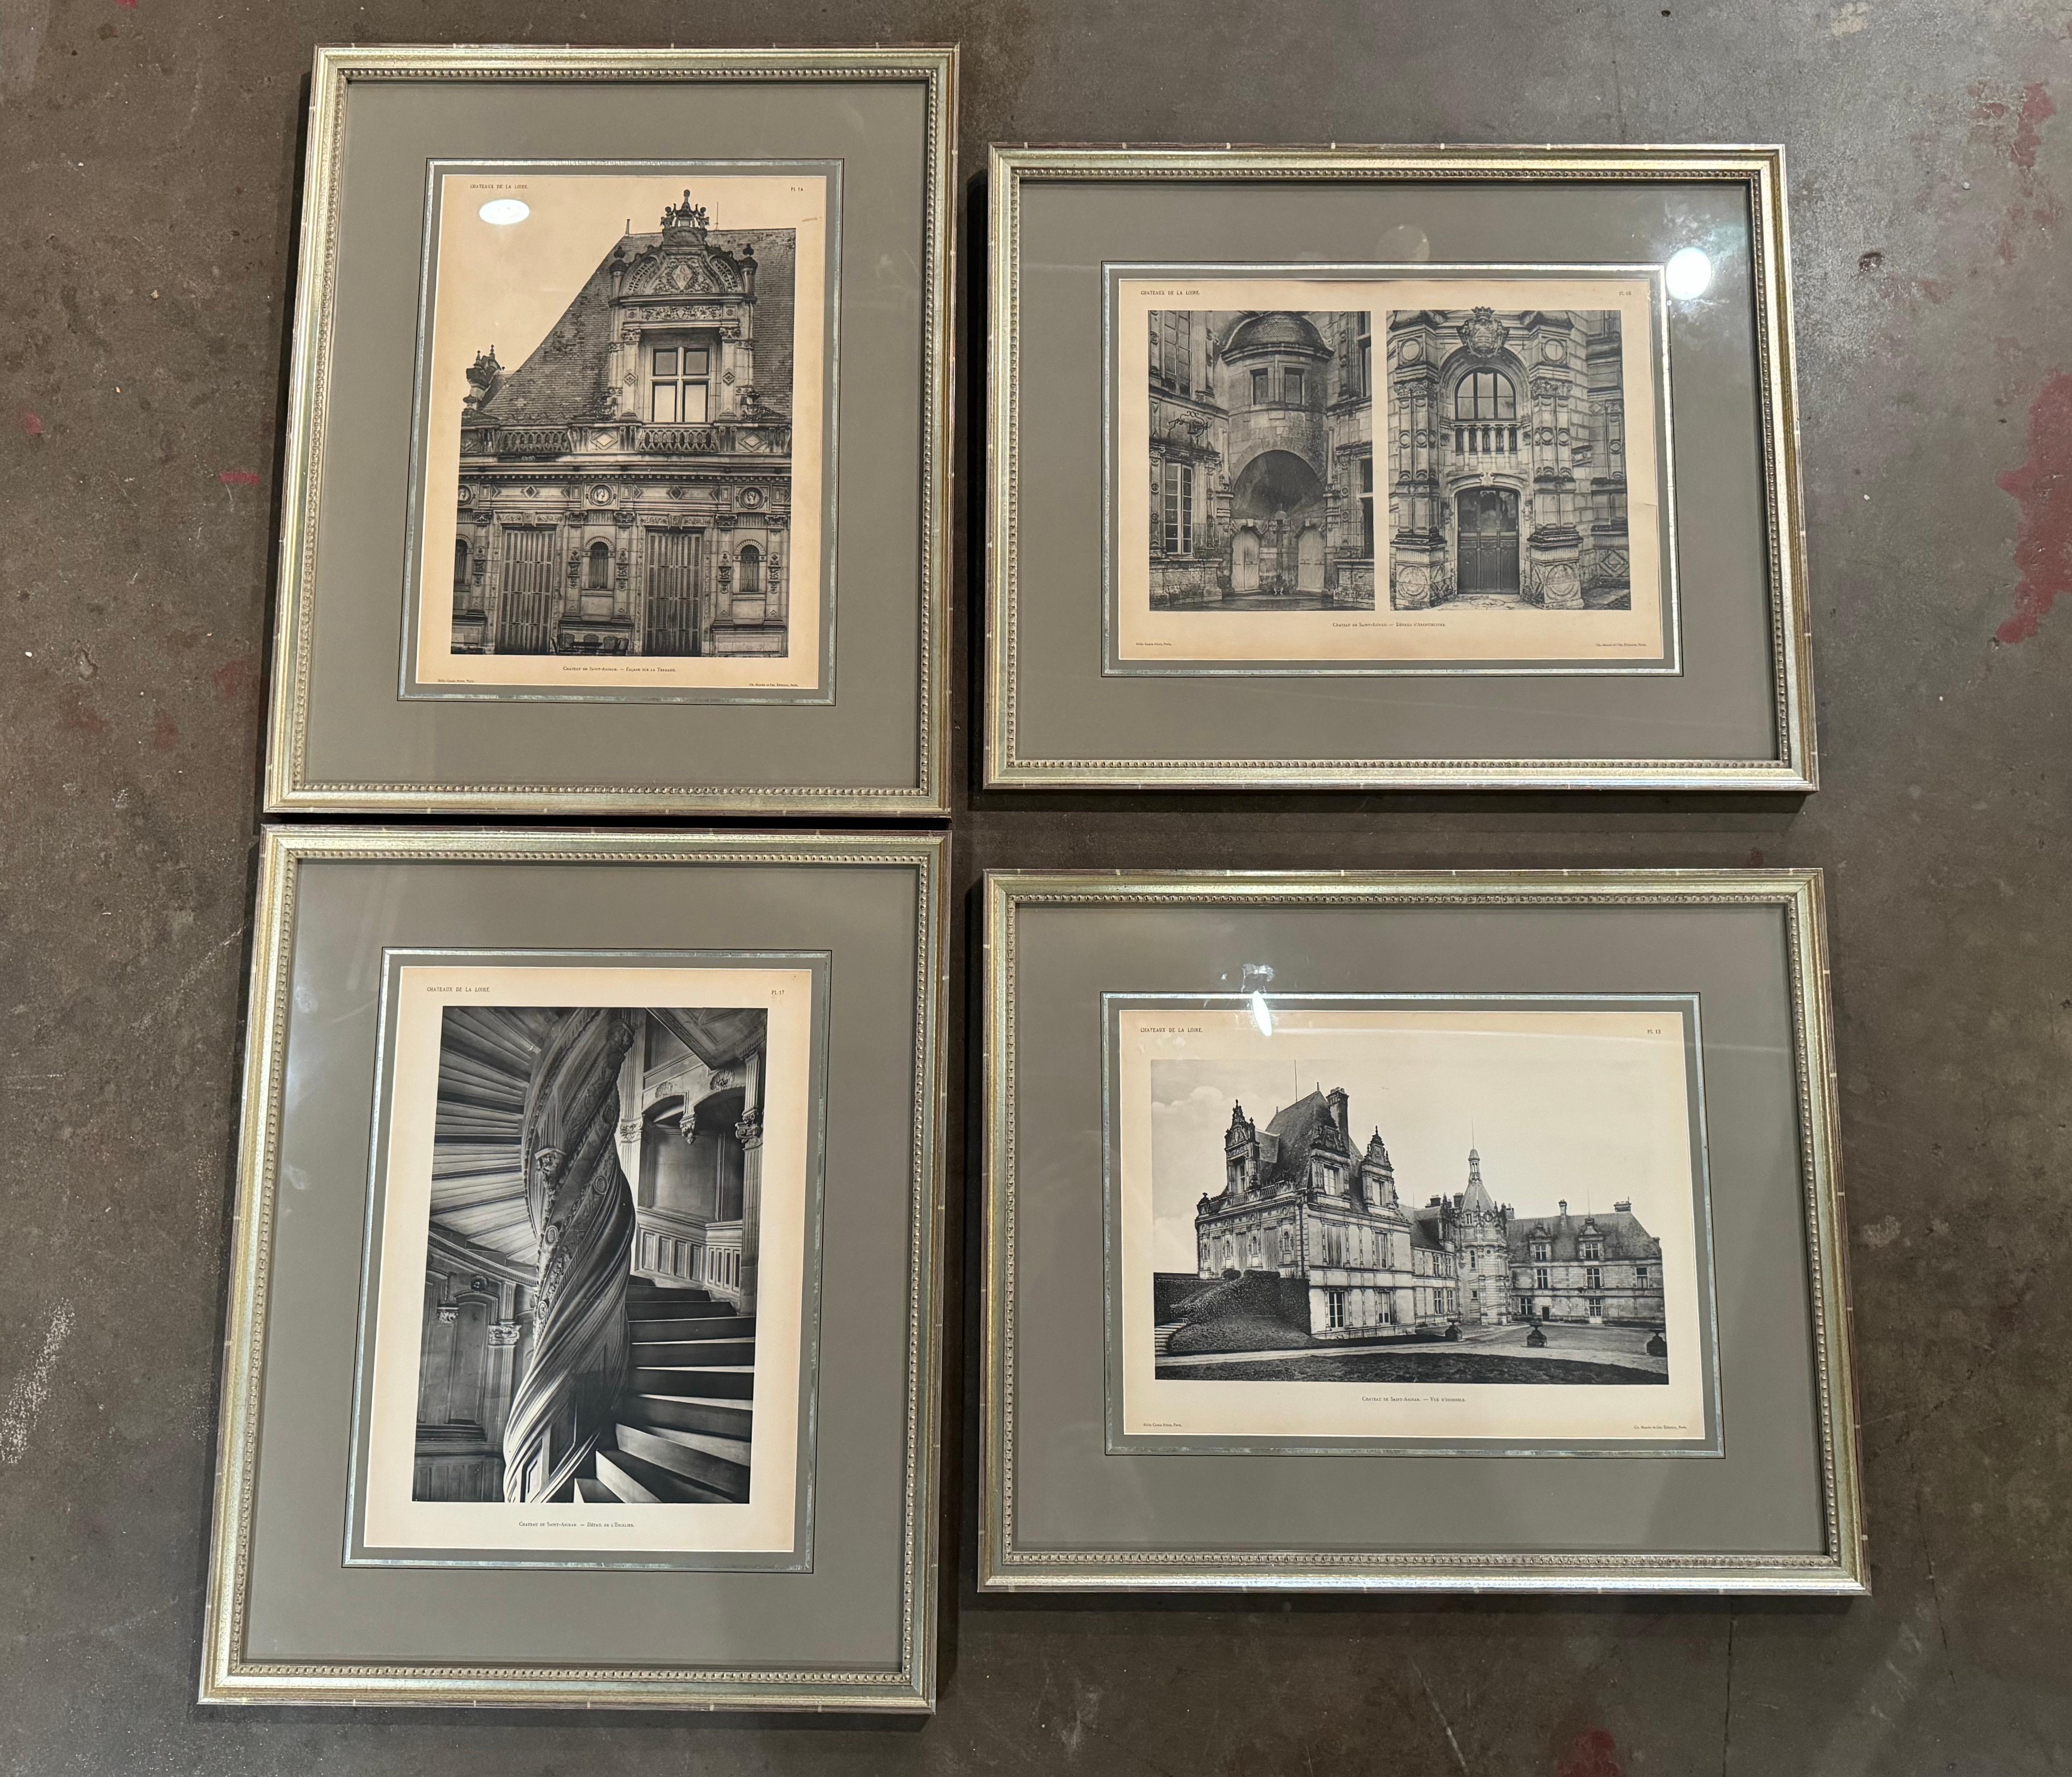 Wood 19th Century French Prints in Frames, 